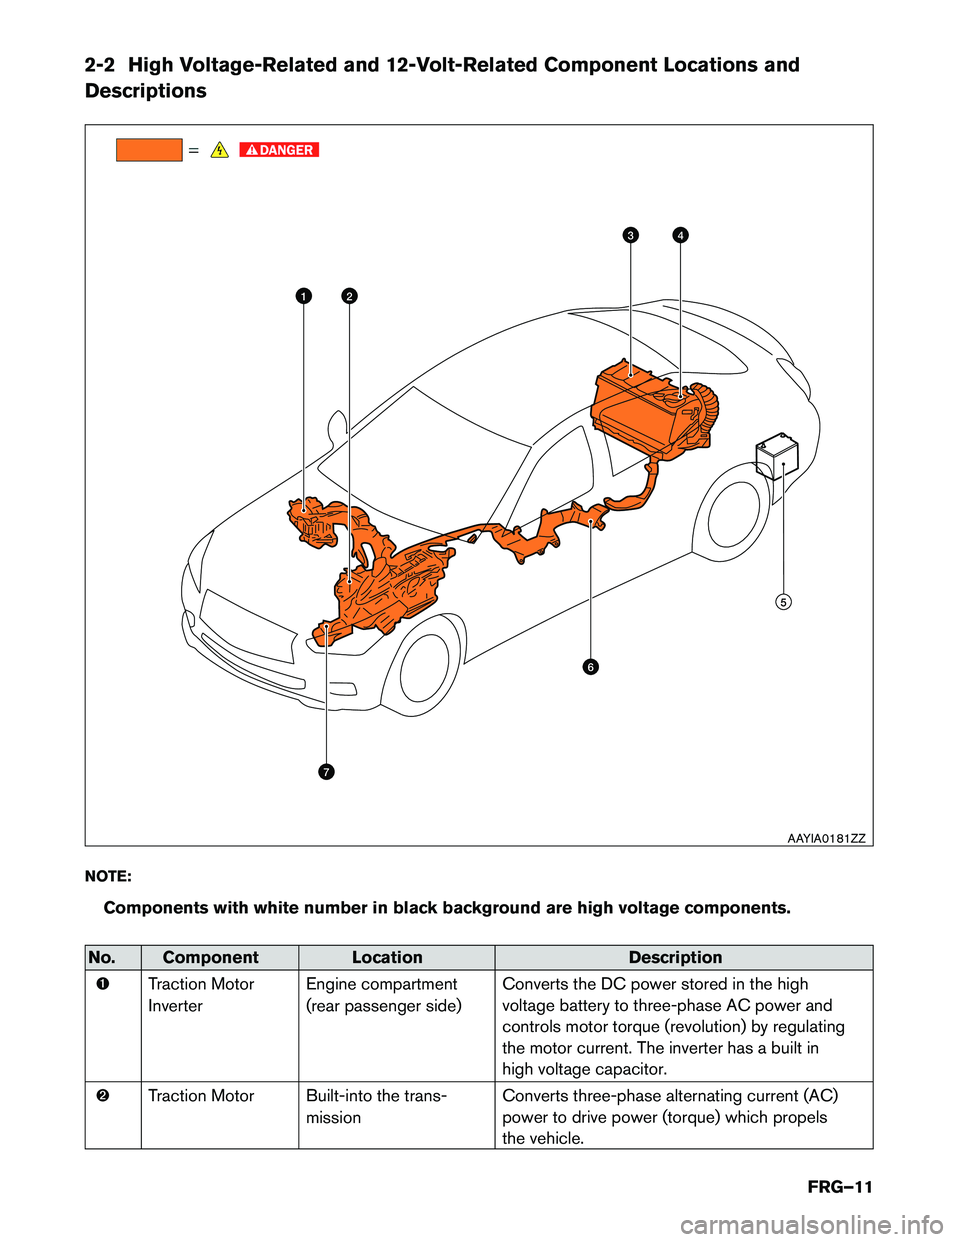 INFINITI Q50 HYBRID 2015  First responder´s Guide 2-2 High Voltage-Related and 12-Volt-Related Component Locations and Descriptions 
NOTE:Components with white number in black background are high voltage components.
No. Component Location Description